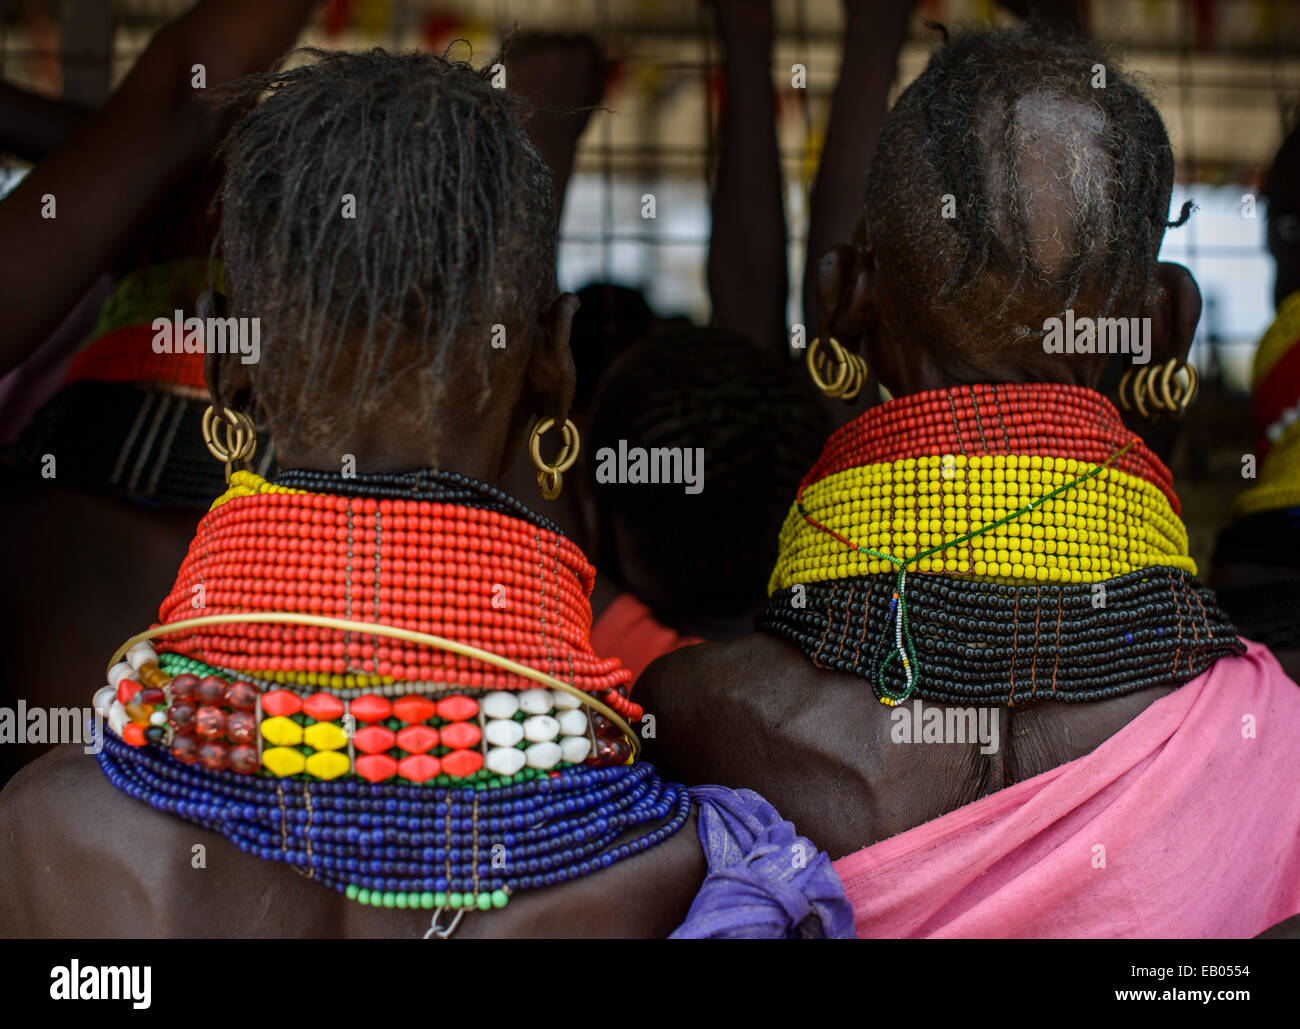 Necklaces, earrings and hairstyle of the Turkana women, Kenya Stock Photo